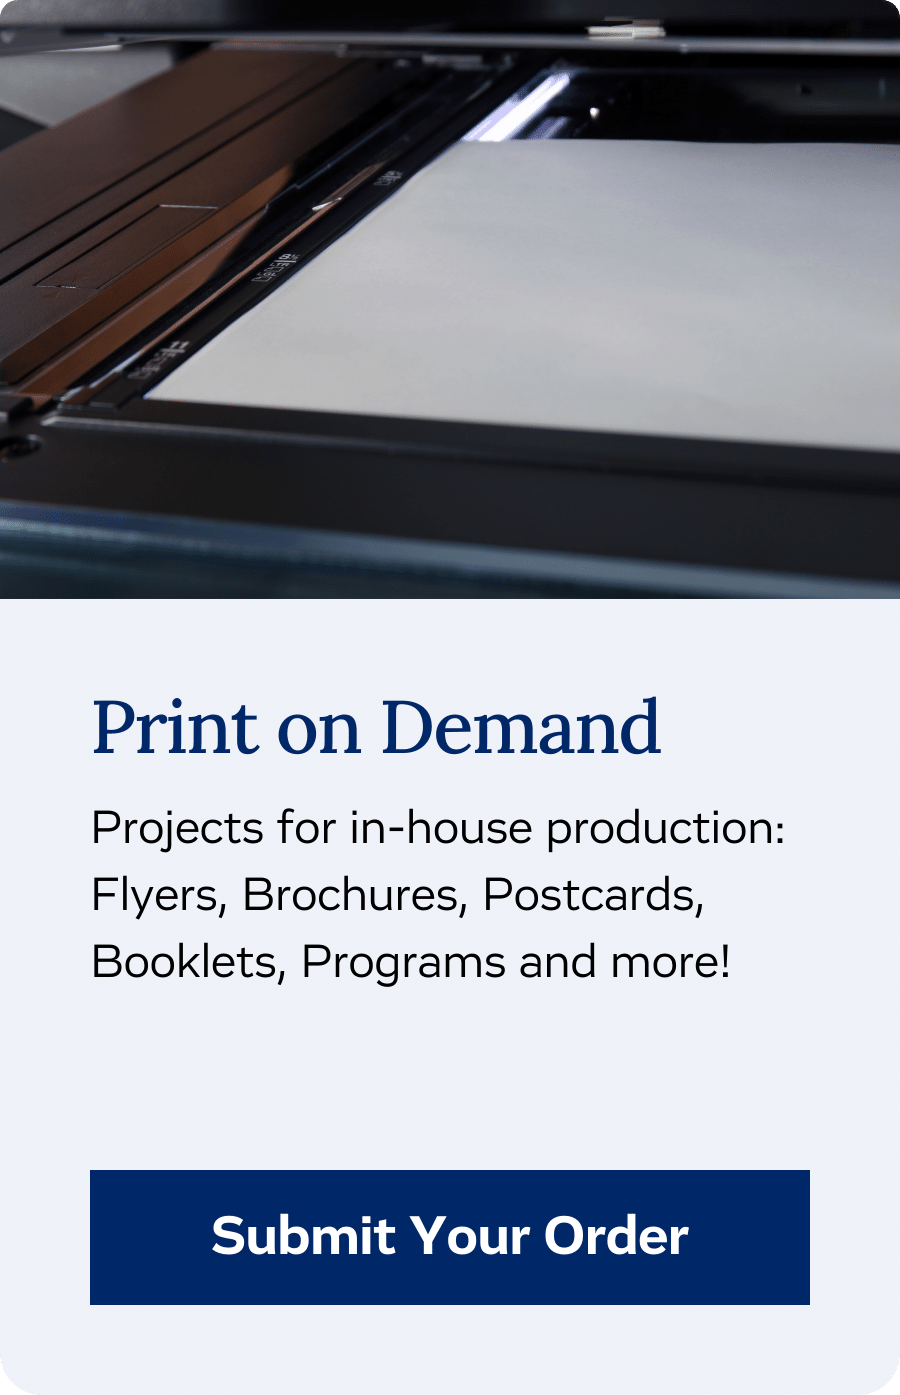 Print On-Demand. Projects for in-house production. Submit a Ticket.